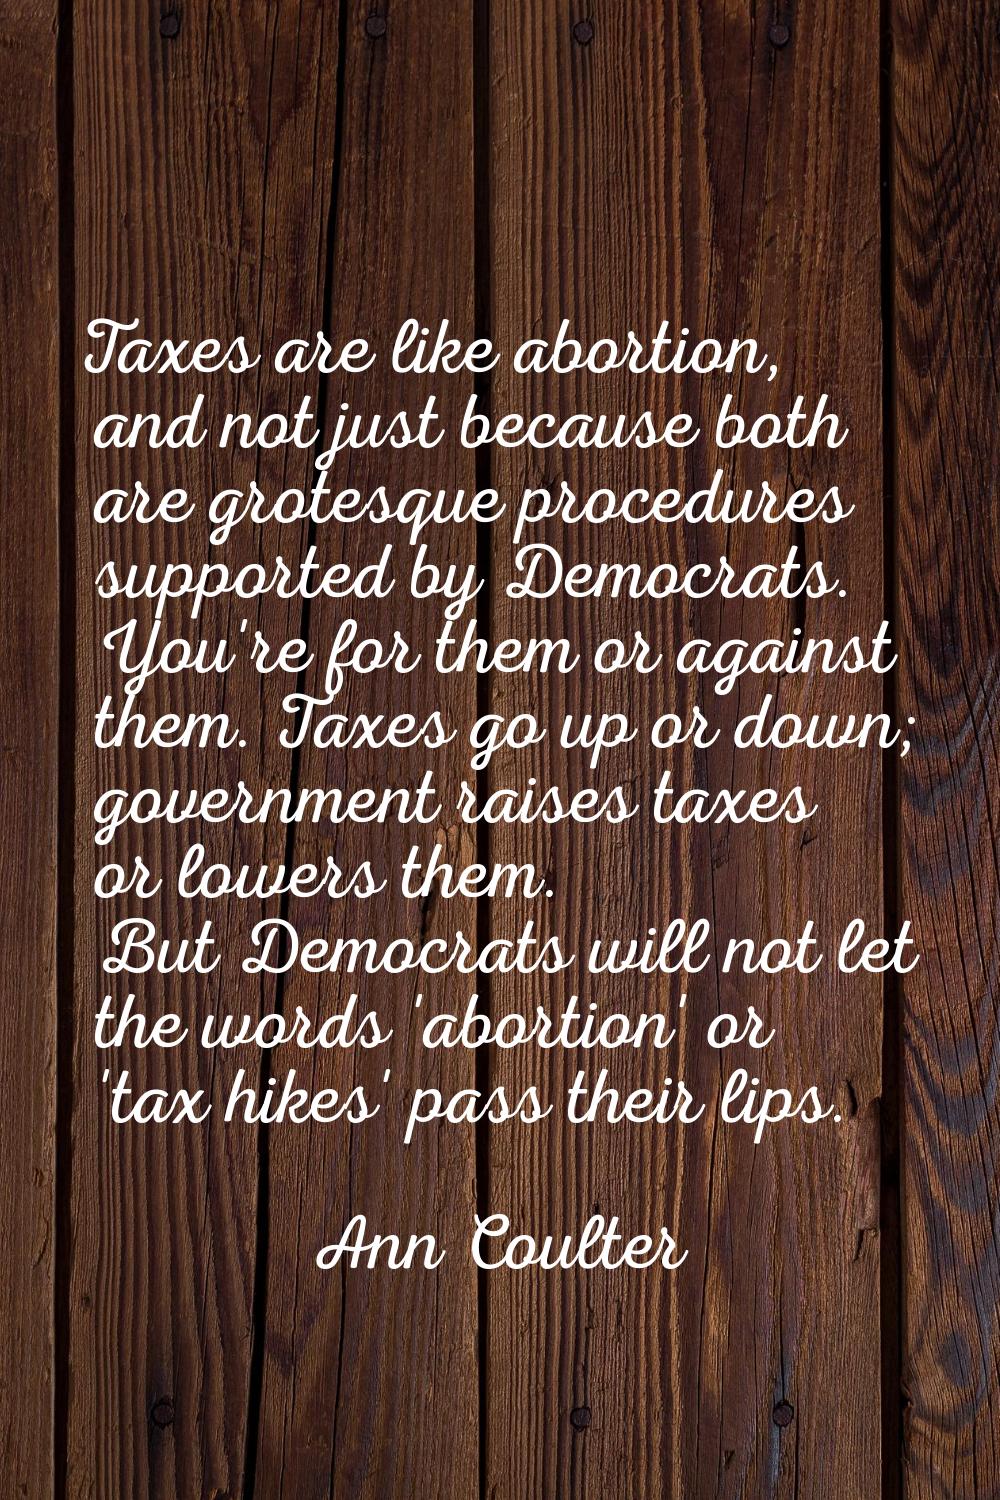 Taxes are like abortion, and not just because both are grotesque procedures supported by Democrats.